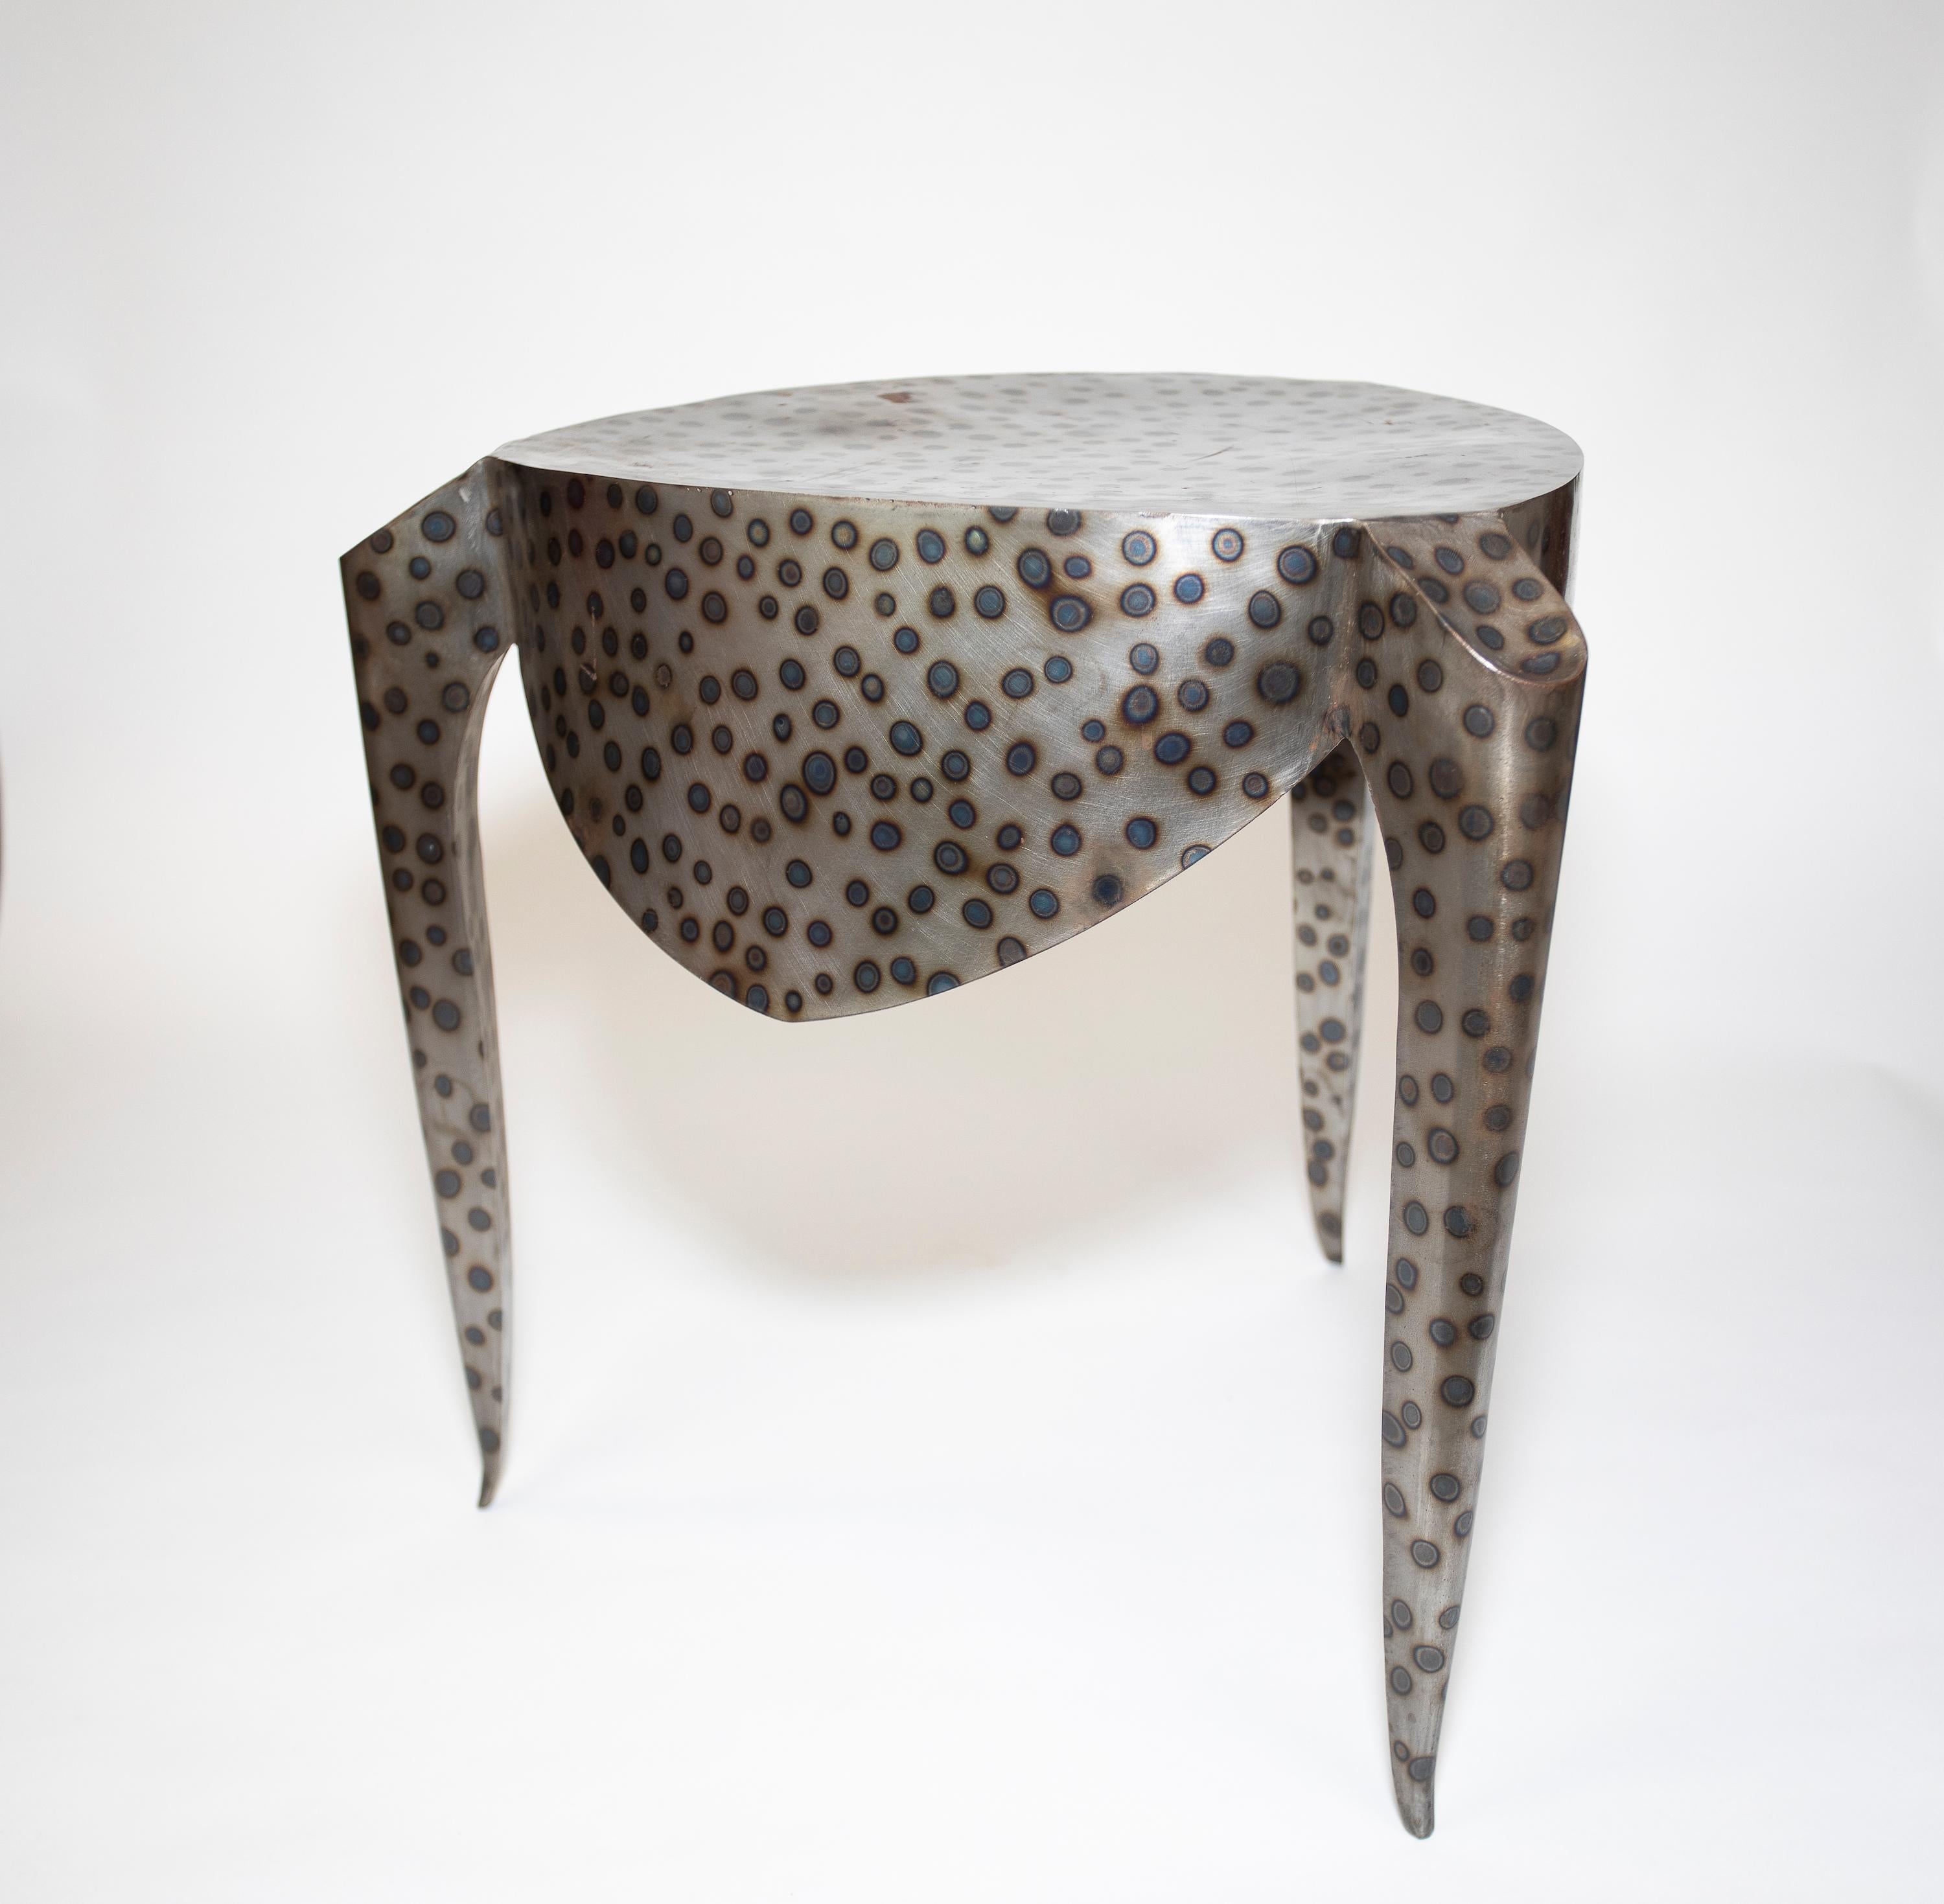 Steel Andre Dubreuil Paris Table / Stool For Sale